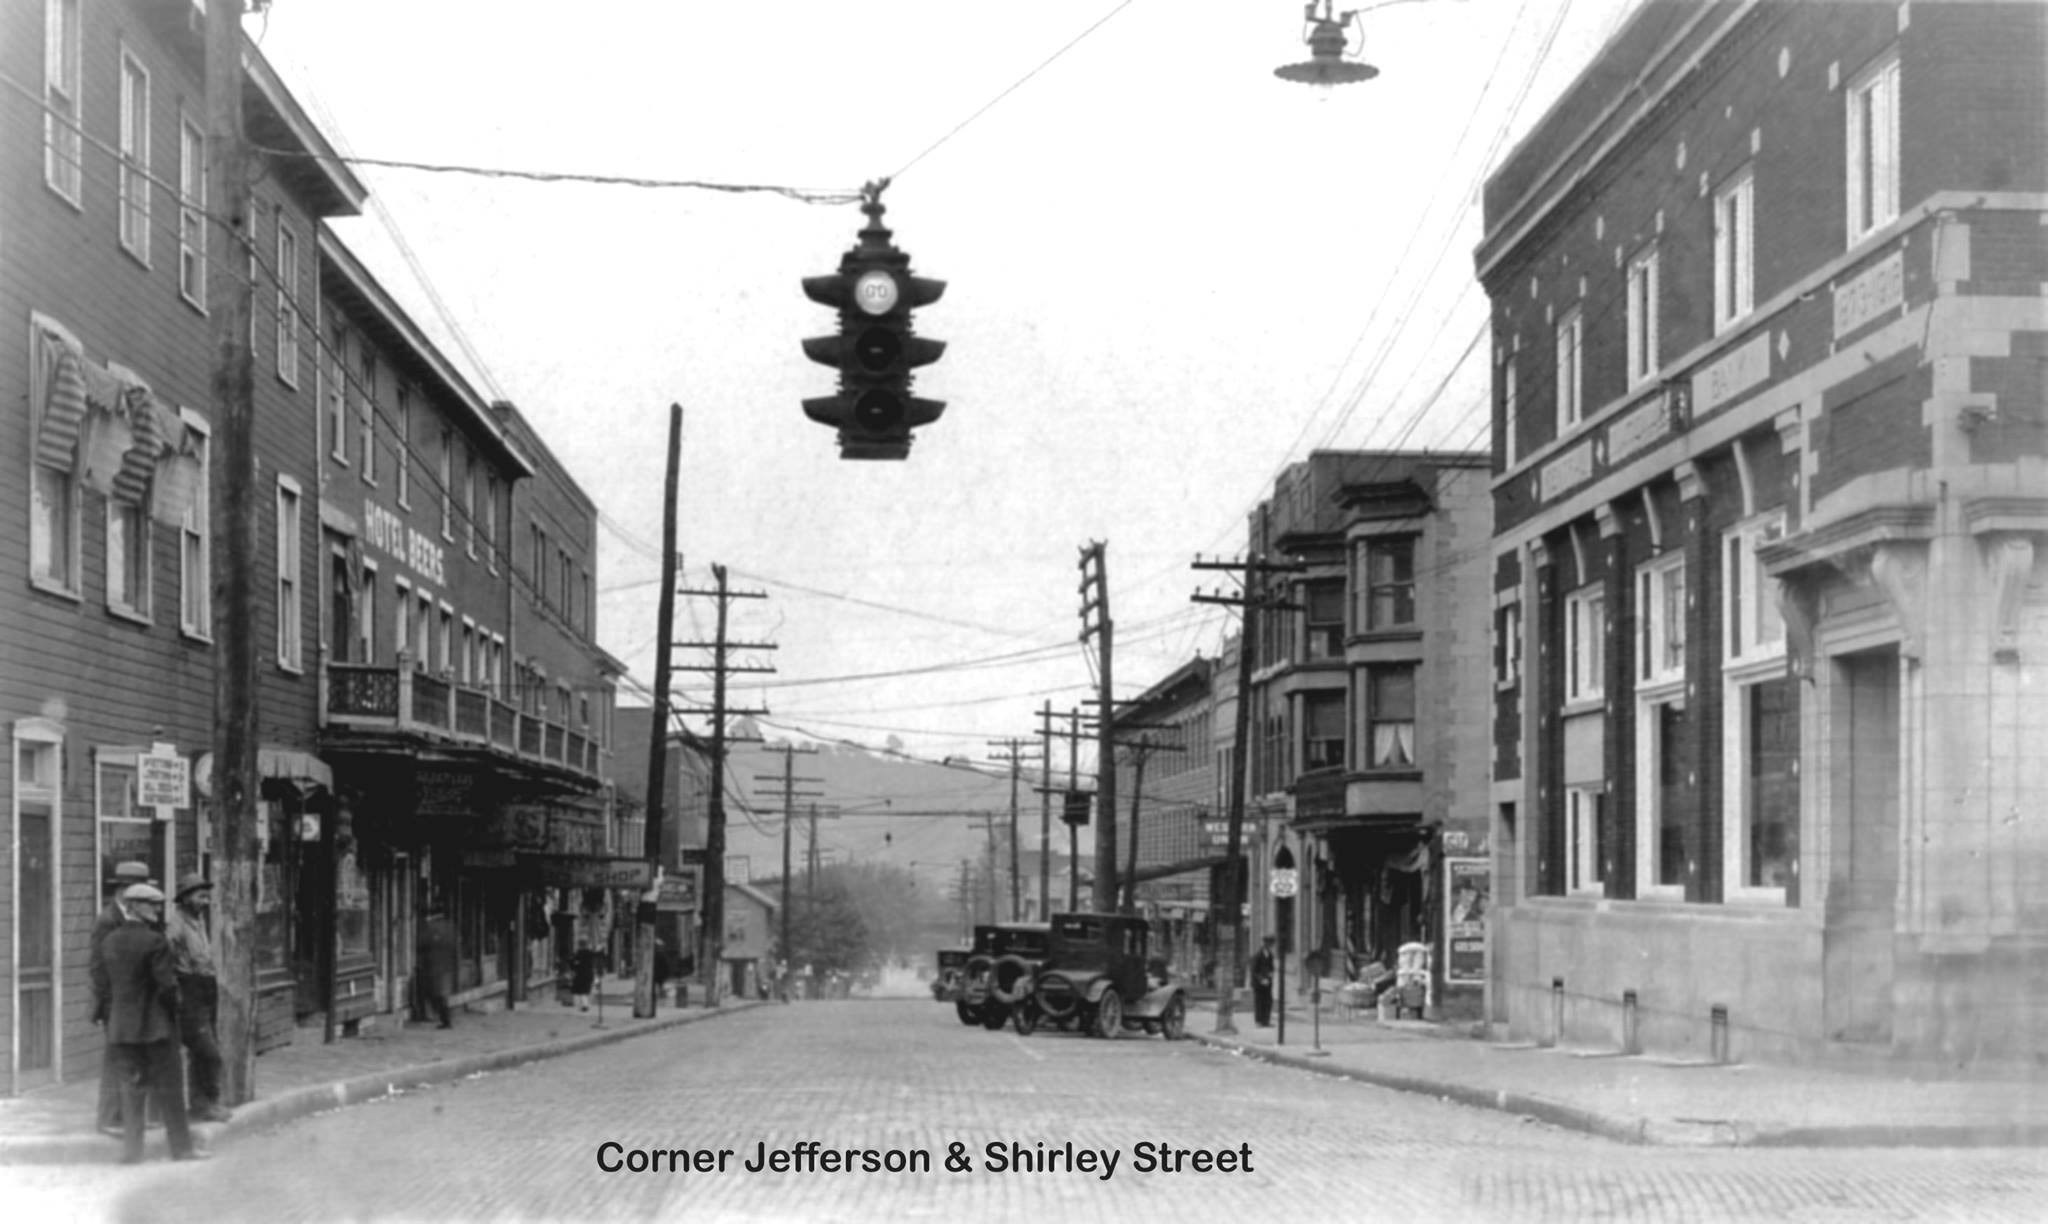 Corner of Jefferson and Shirley Streets